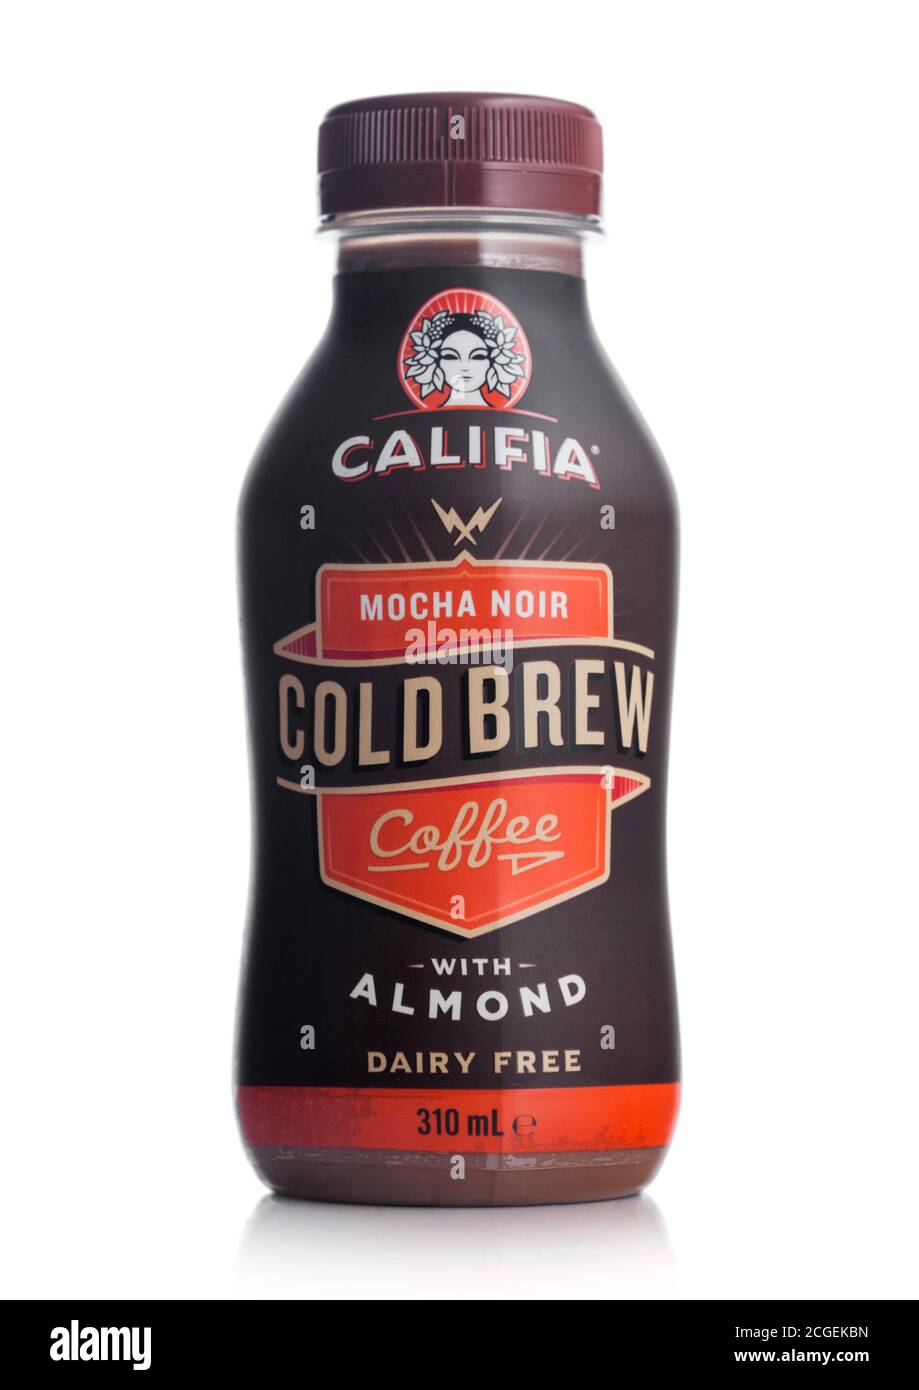 LONDON, UK - SEPTEMBER 09, 2020: Bottle of cold Califia mocha noir coffee with almonds on white background. Stock Photo